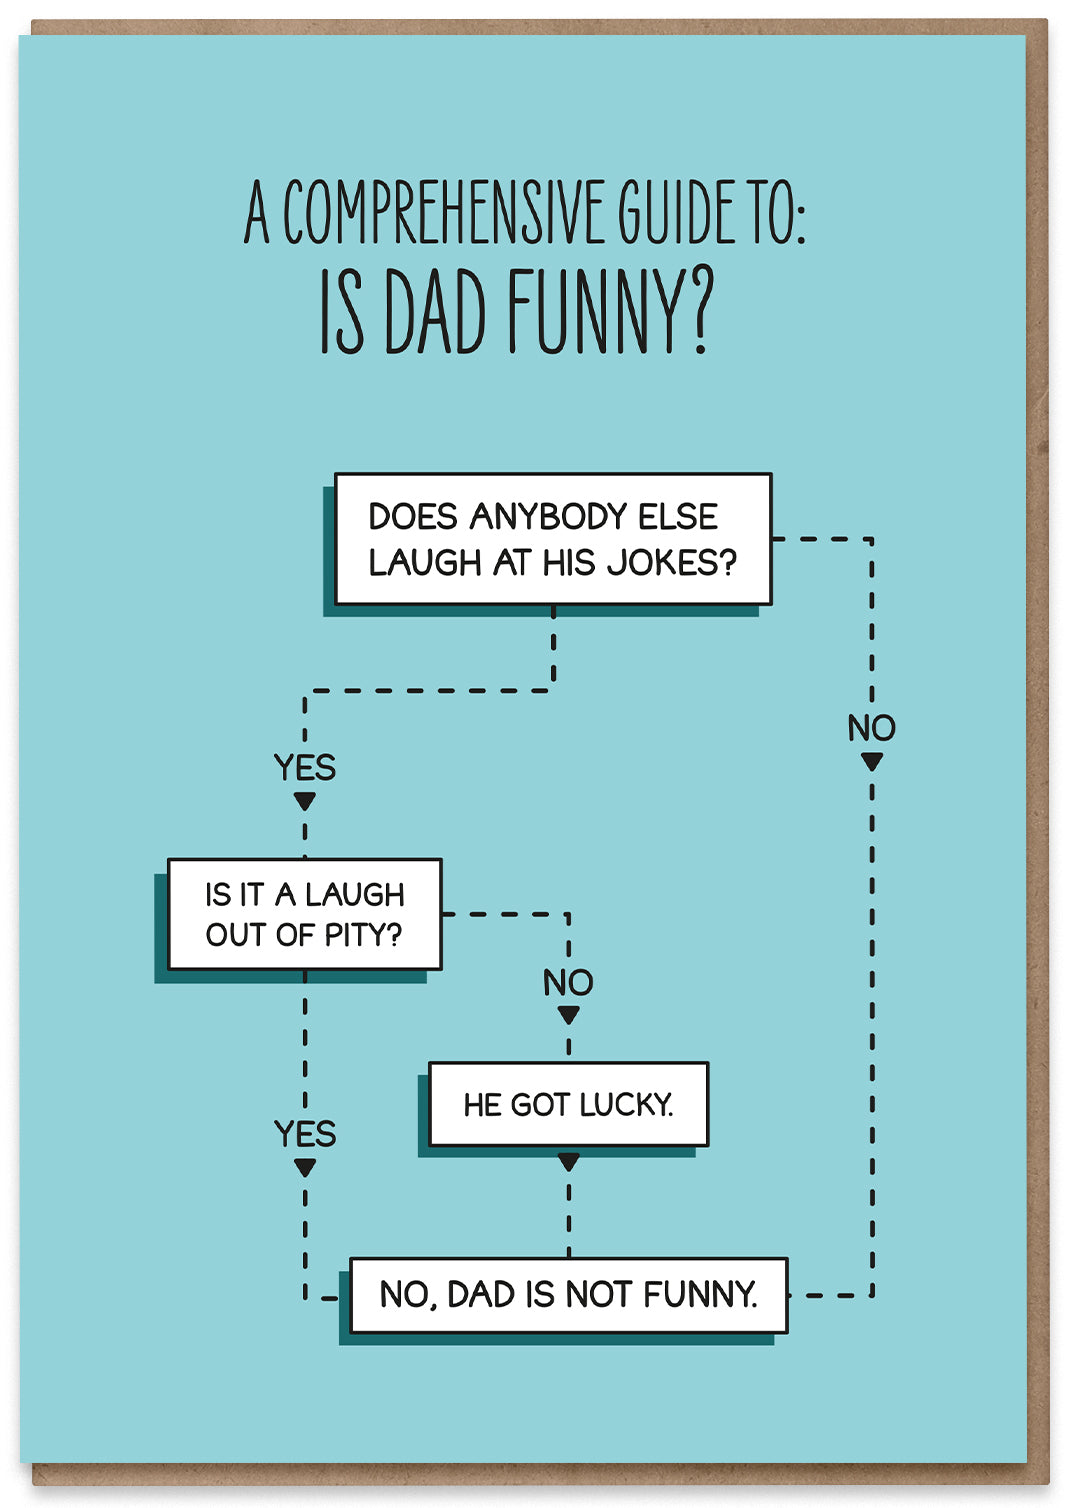 Is Dad Funny?